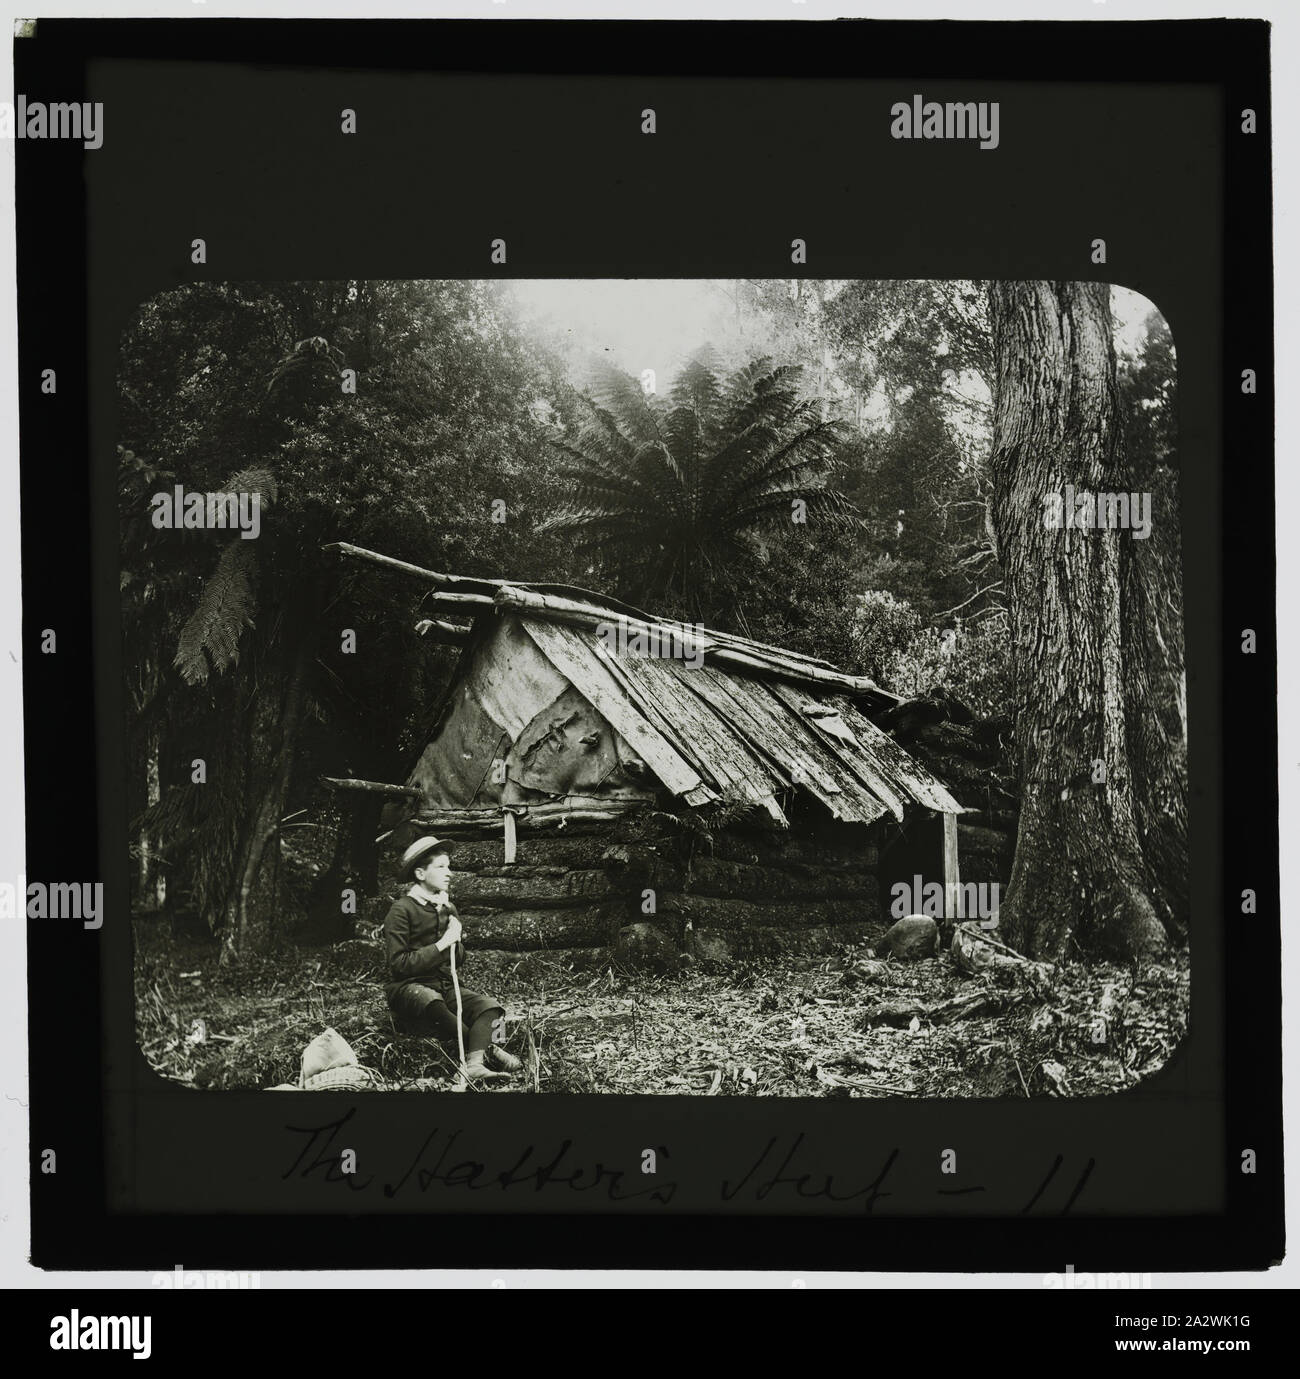 Lantern Slide - 'The Hatter's Hut', Archibald James Campbell, The Dandenongs, circa 1891, This image was taken by Archibald James Campbell during one of his many trips to Dandenongs in the late nineteenth century. The young boy in the image is believed to be his eldest son, Archibald George. Campbell, a well-known Naturalist, was one of the first in Australia to employ nature photography in recording his fieldwork. He was also a great proponent of environmental protection Stock Photo